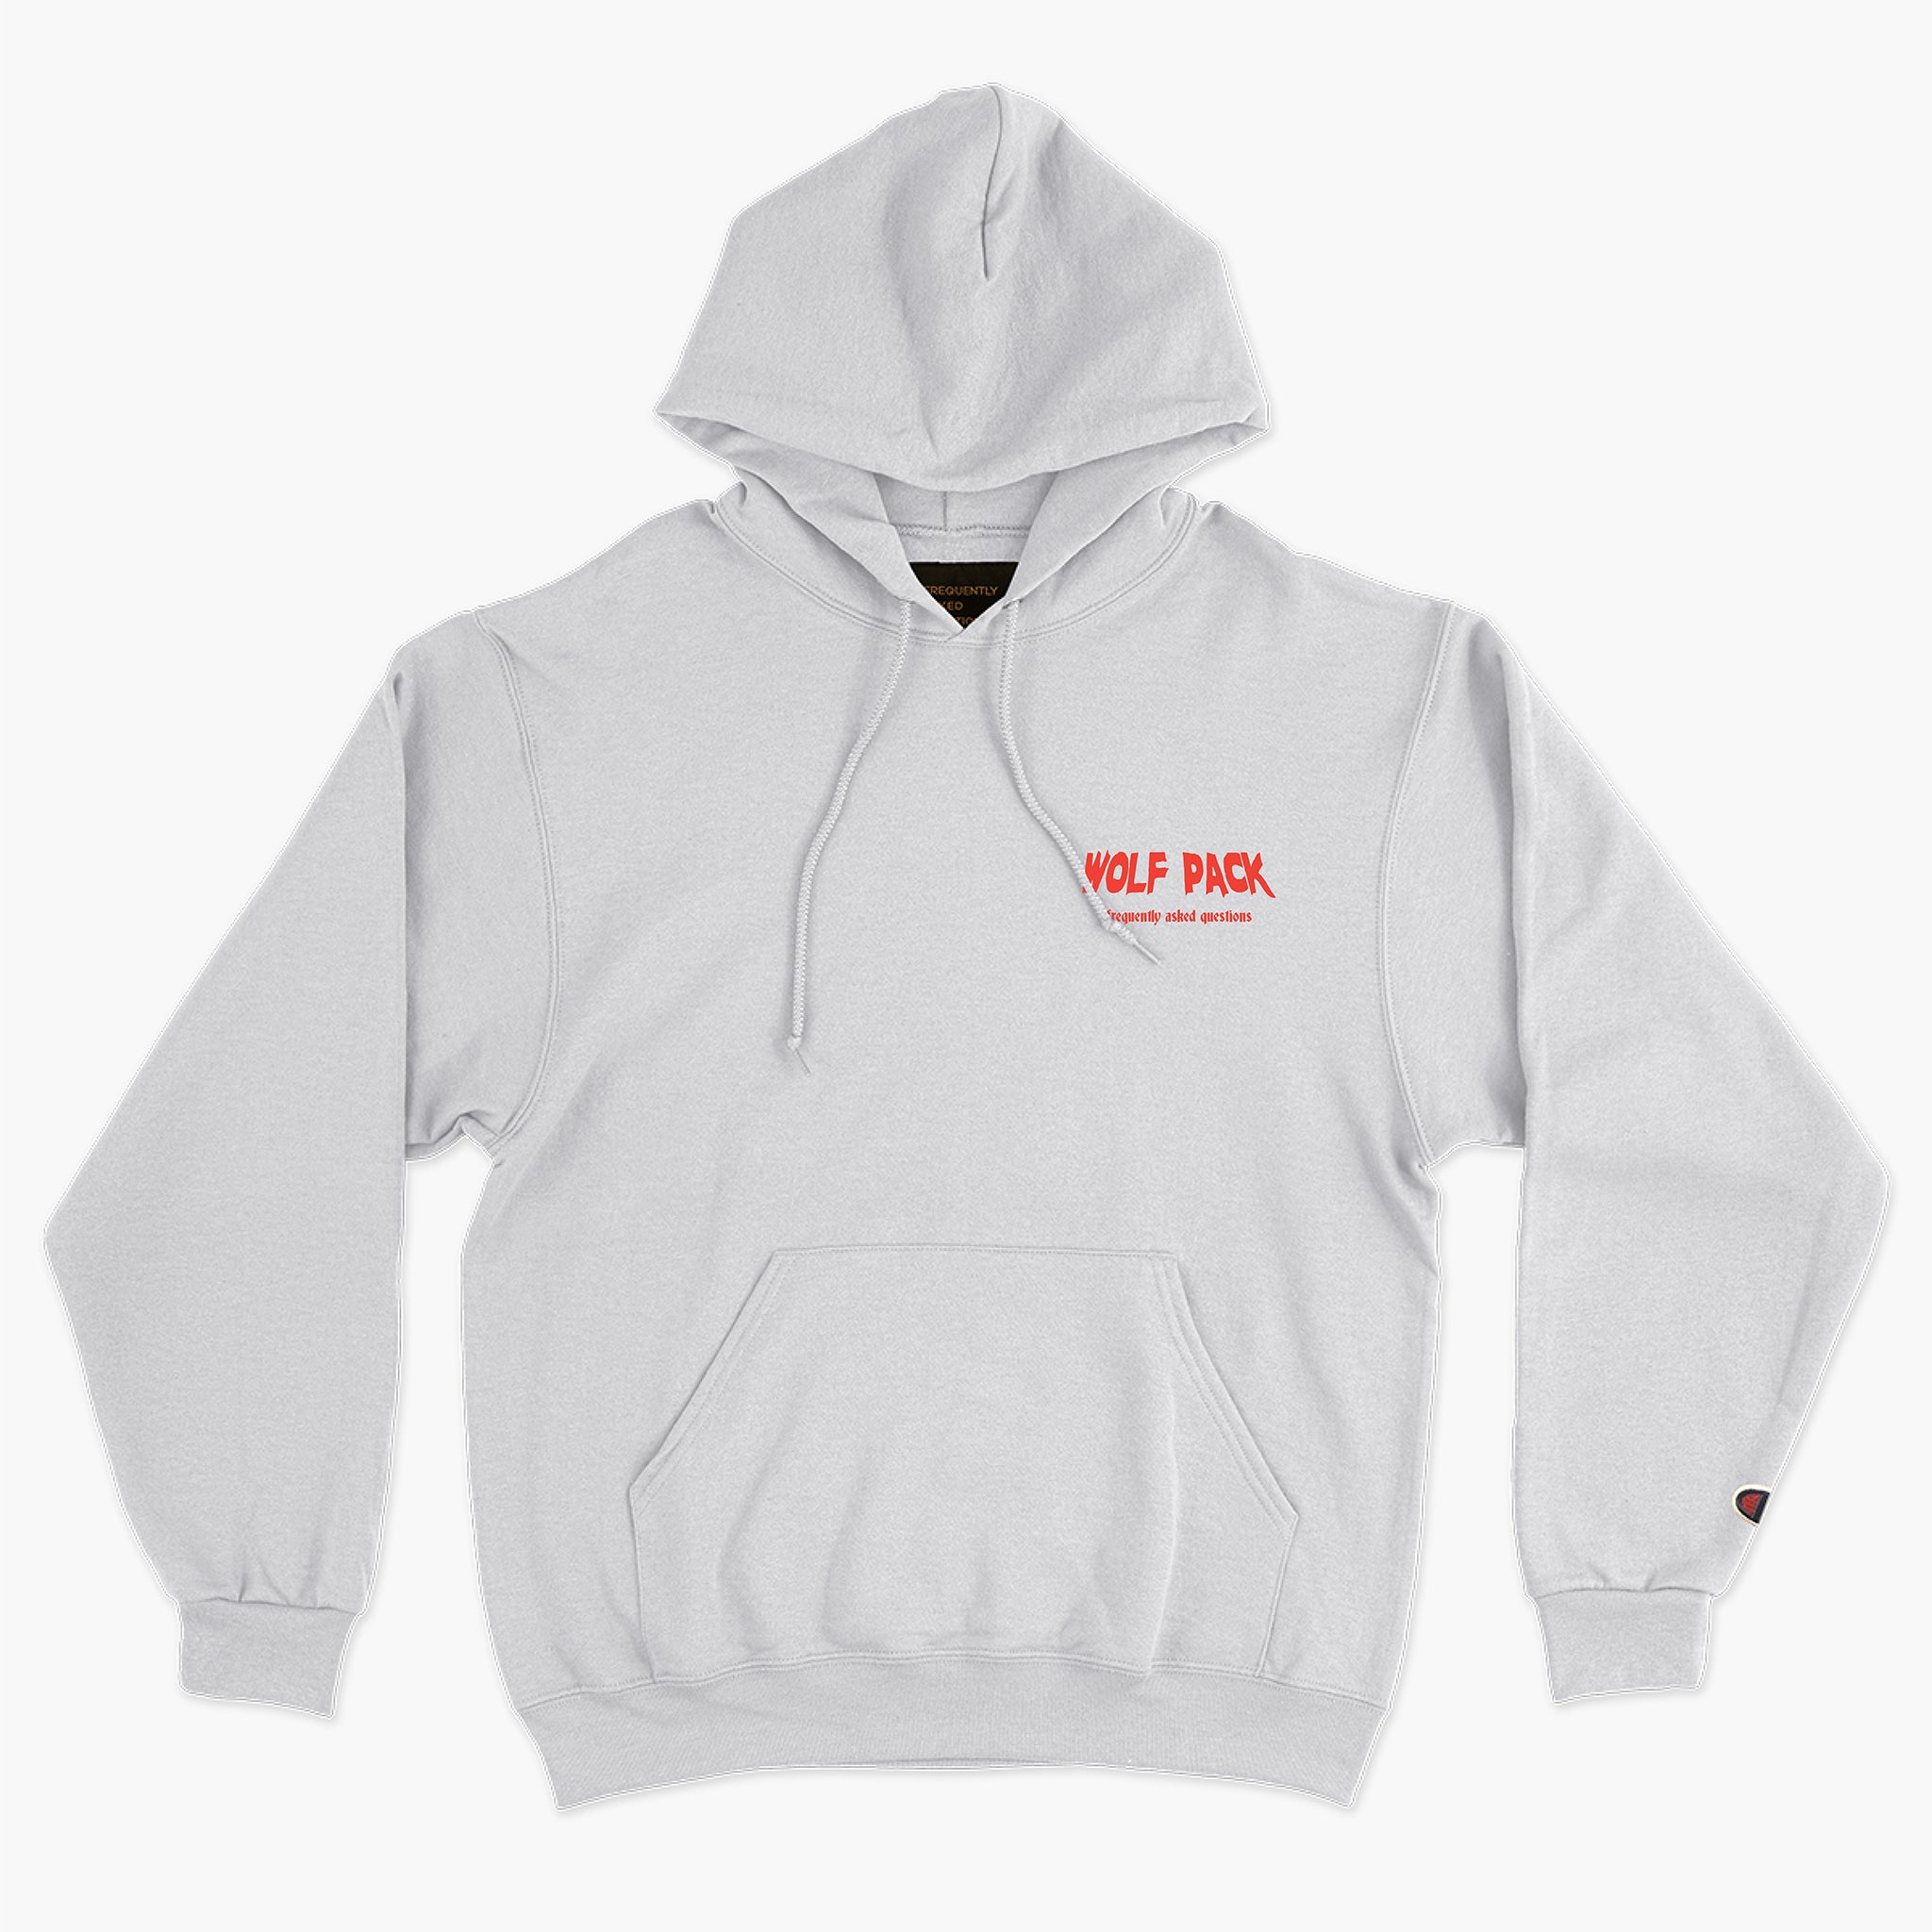 Wolf Pack Hoodie - Frequently Asked Questions